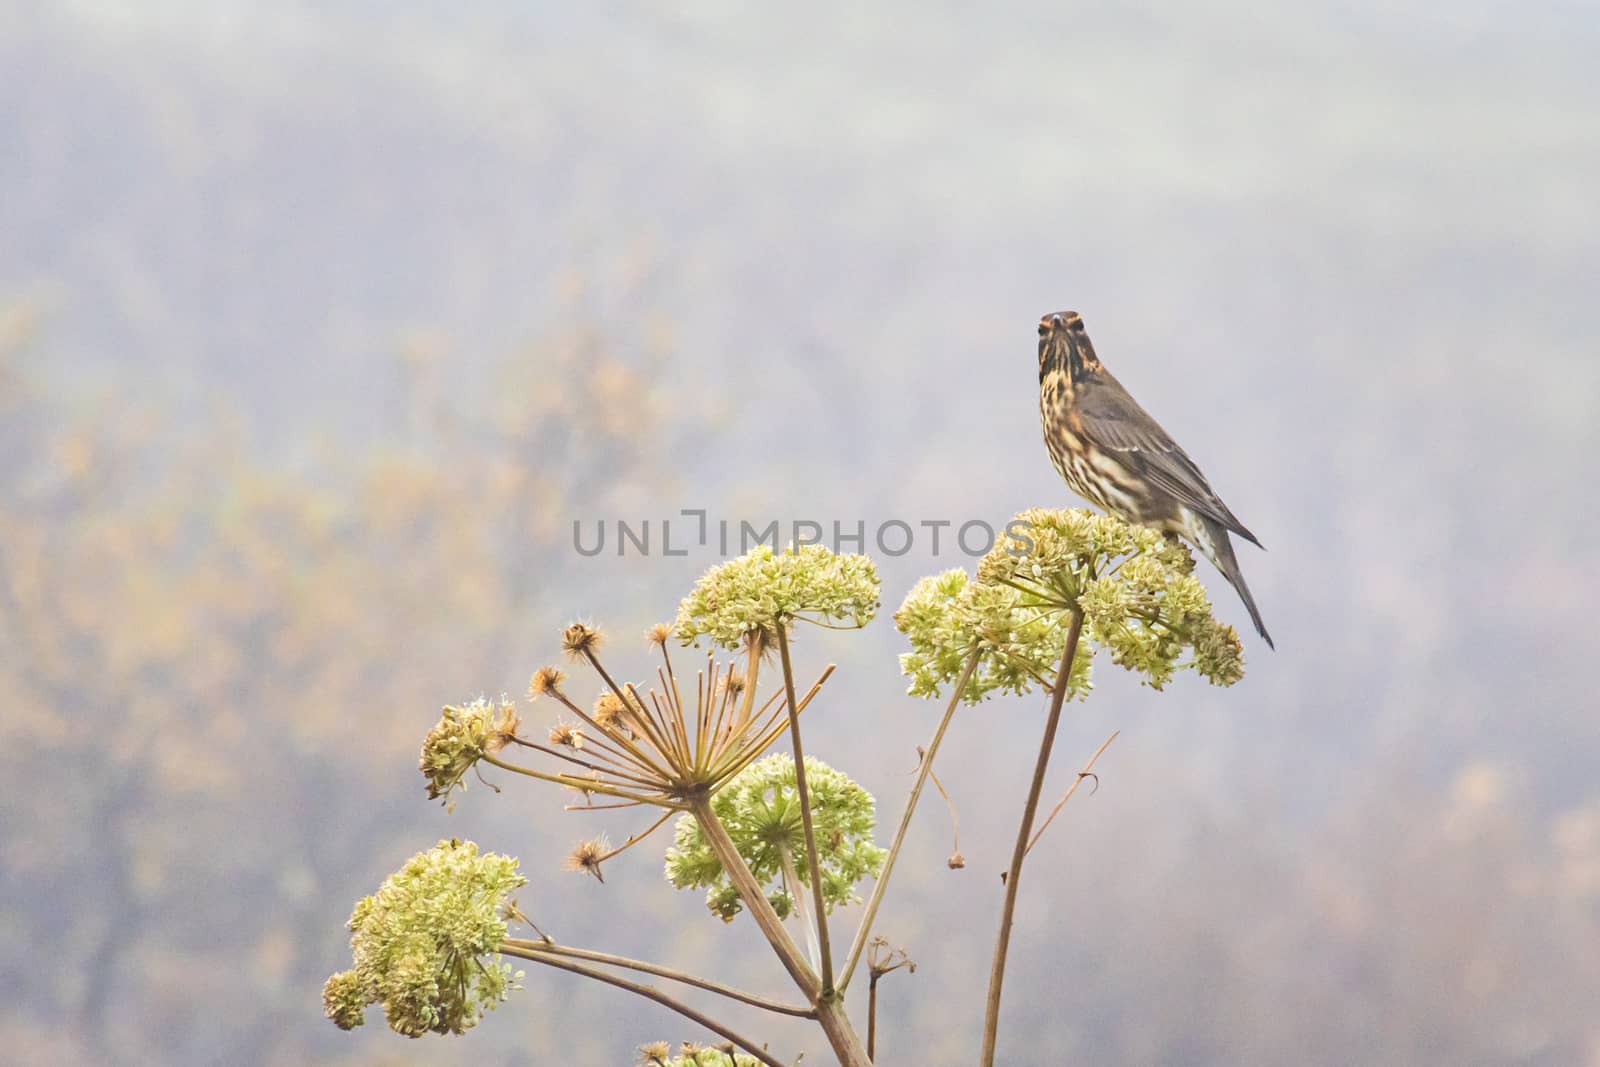 Red wing bird sitting on top of plant in fog during autumn